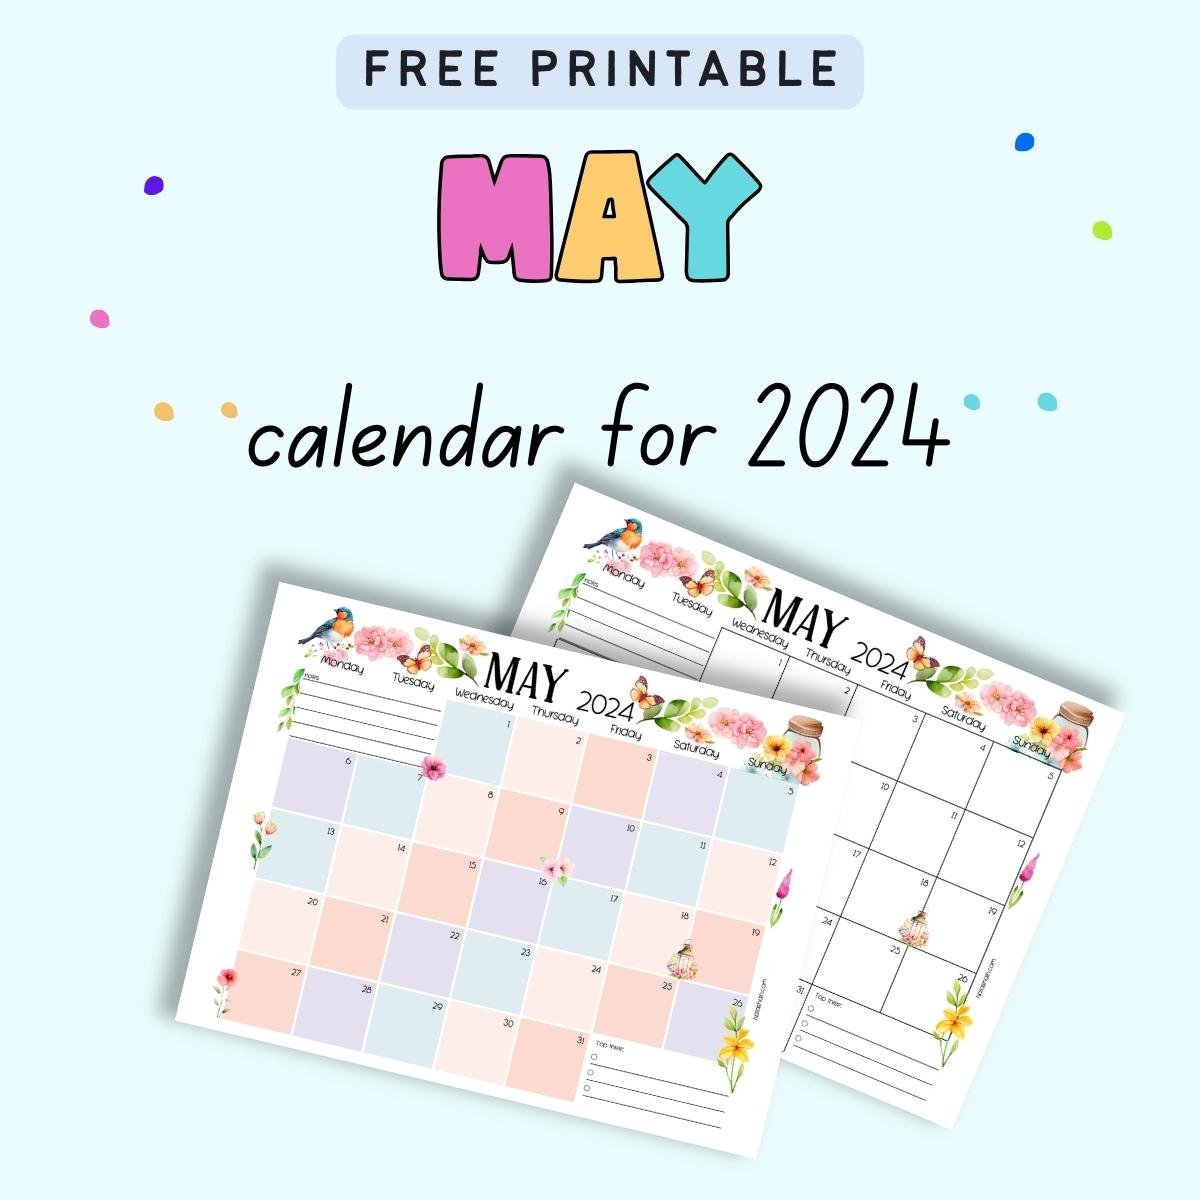 Text "free printable May 2024 calendar" with a preview of two pages of May calendar printable with filled in dates.